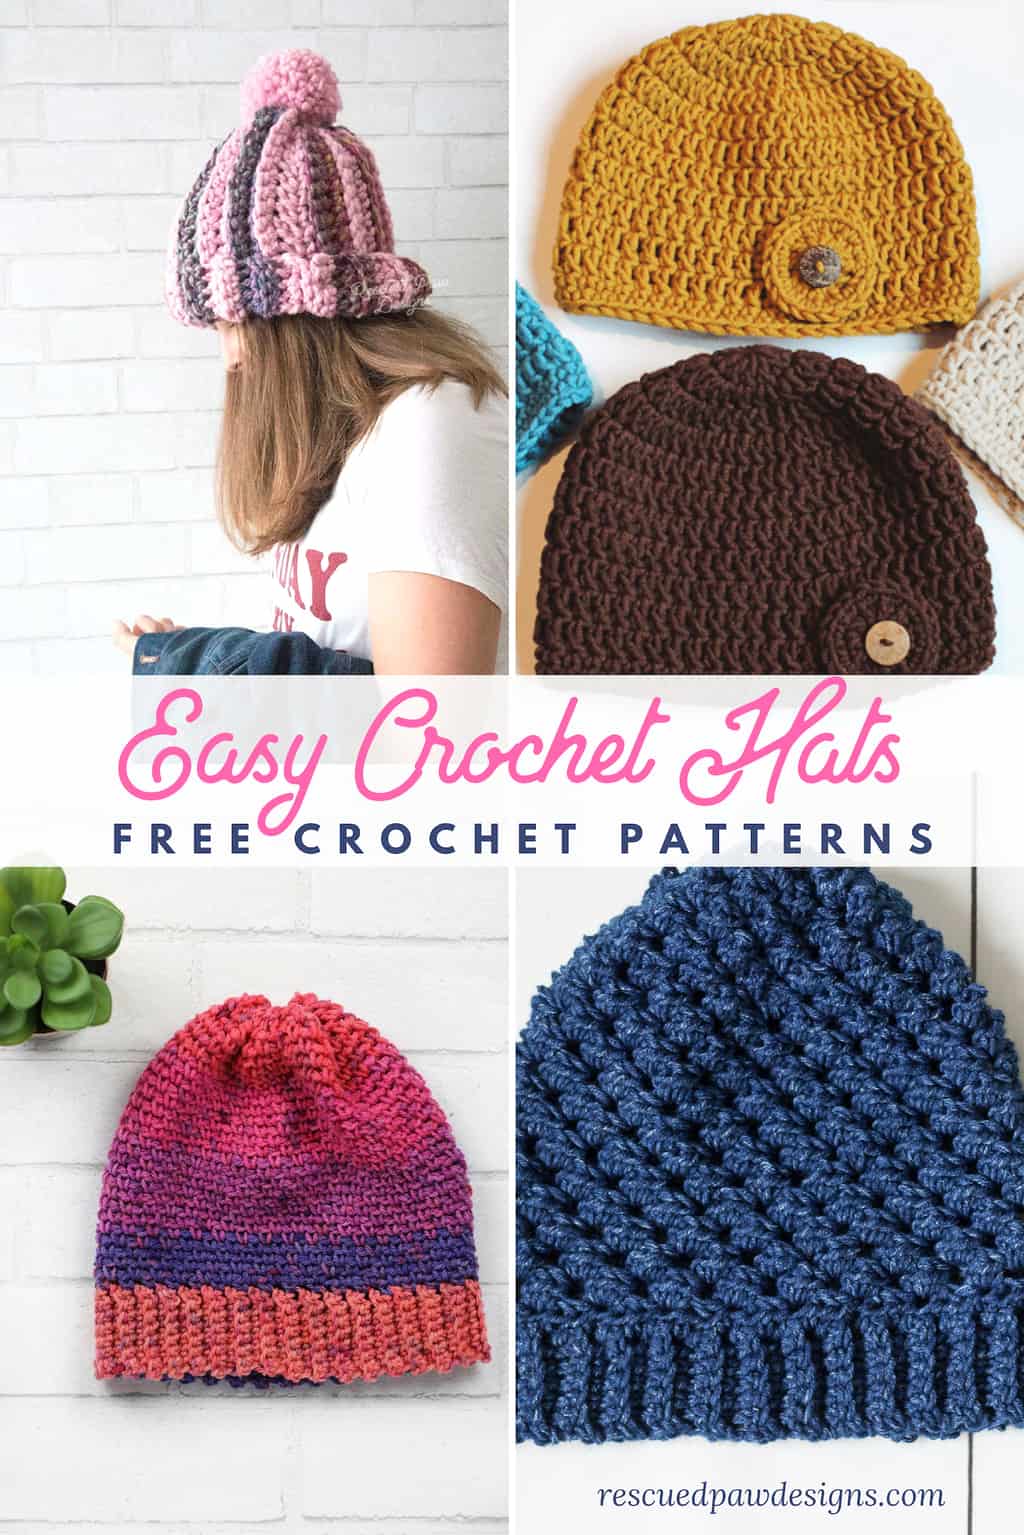 Easy Crochet Hat Patterns For Beginners Easycrochet Com,What Are Potstickers Made Out Of